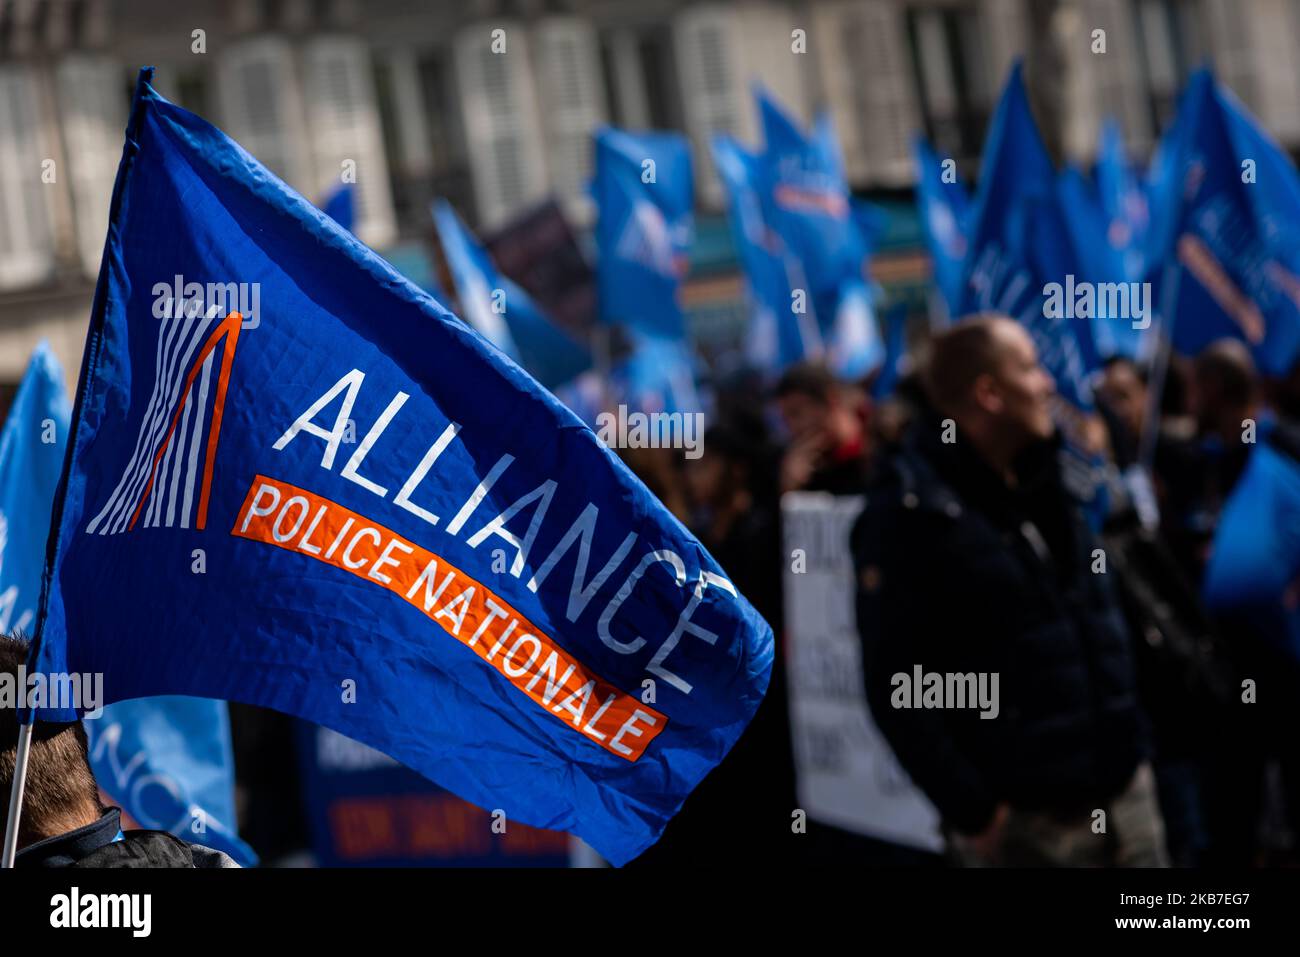 In the foreground, a flag of the Alliance Nationale Nationale union floats in the wind while in the background there is a procession of demonstrators on Wednesday, October 2, 2019, during the police demonstration in Paris at the call of the majority of police unions (including National Police Alliance and SGP Police Unit) for the 'March of anger' between the places of the Bastille and the Place de la République. This historic event day, which brought together more than 20,000 police officers, aimed to raise awareness about working conditions and lack of police resources, but especially about t Stock Photo